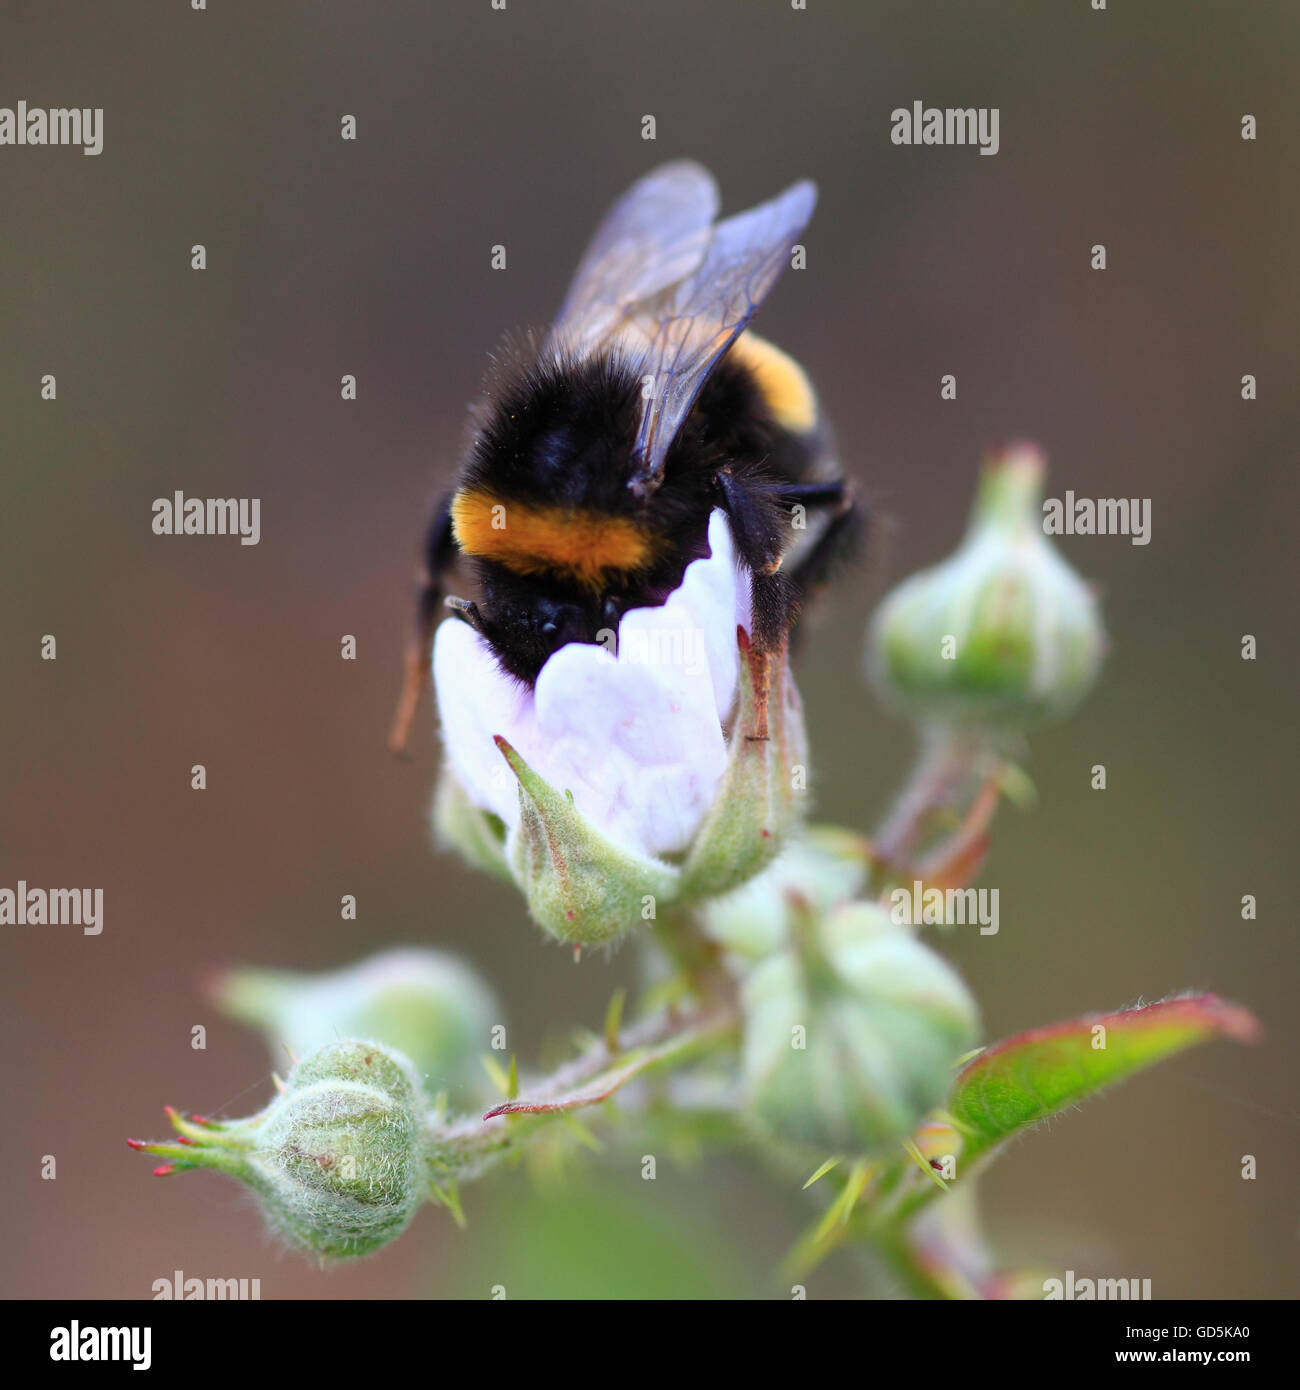 Bee collecting pollen on a blackberry flower. Stock Photo